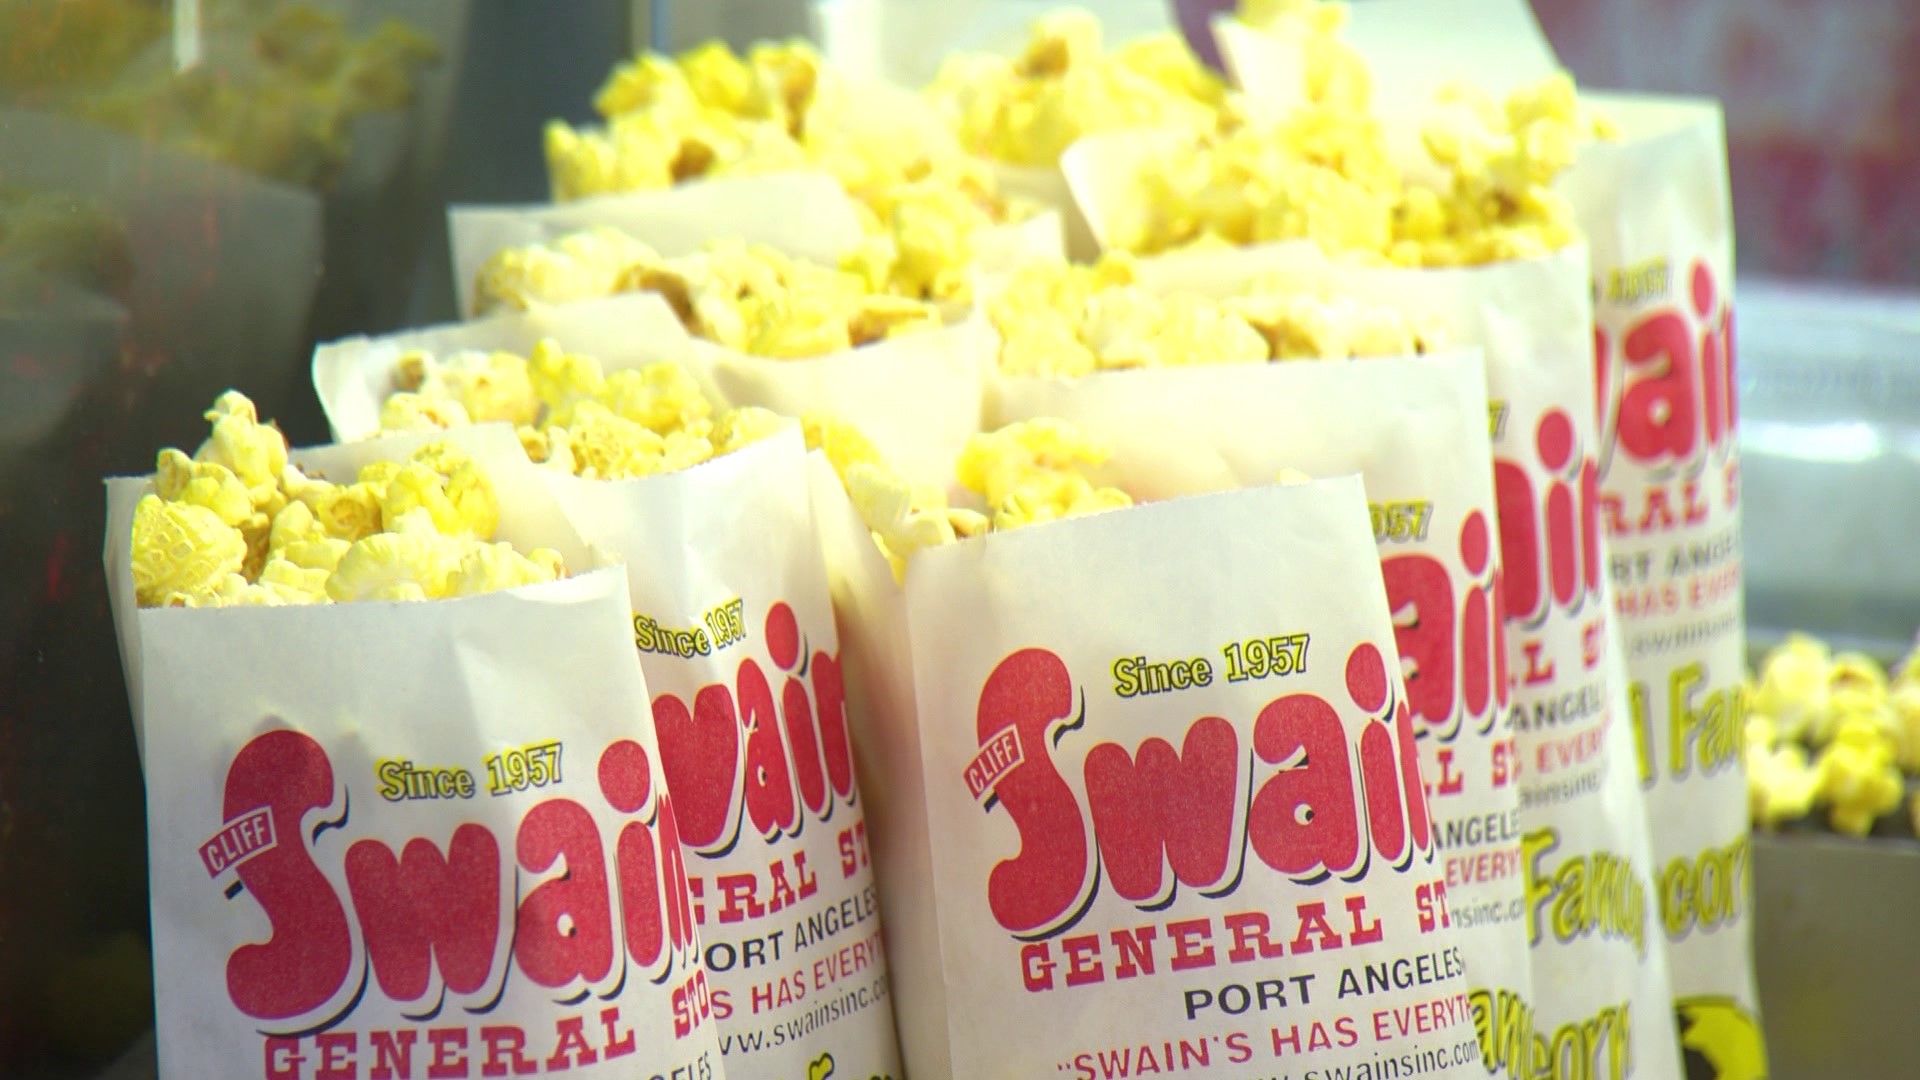 Swain's sells this pop-ular item for just 25 cents a bag. #k5evening